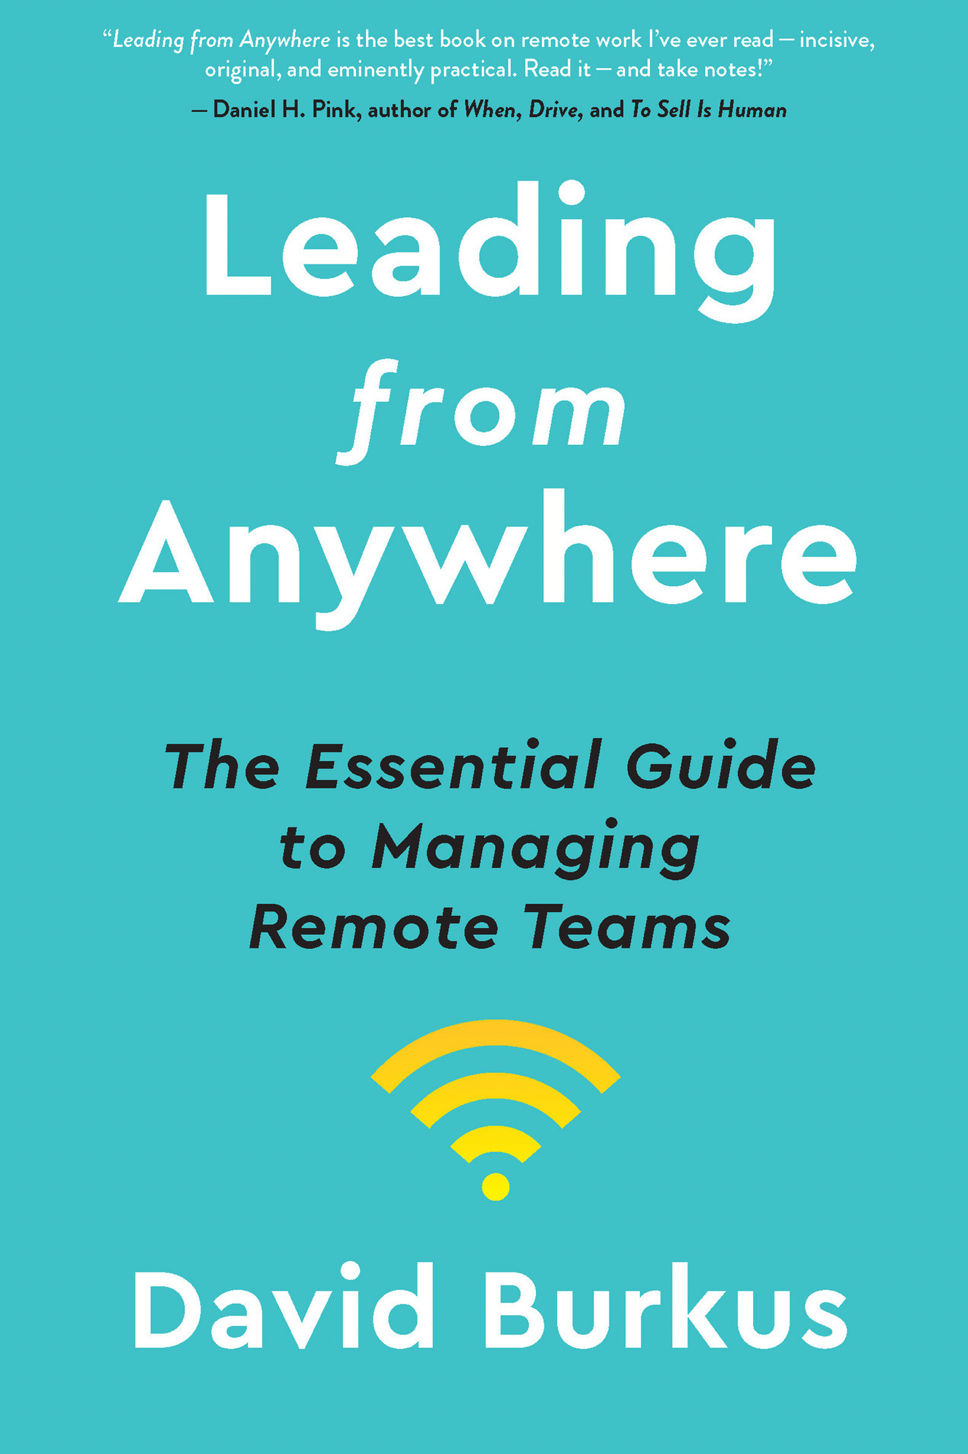 Book cover of Leading from Anywhere by David Burkus